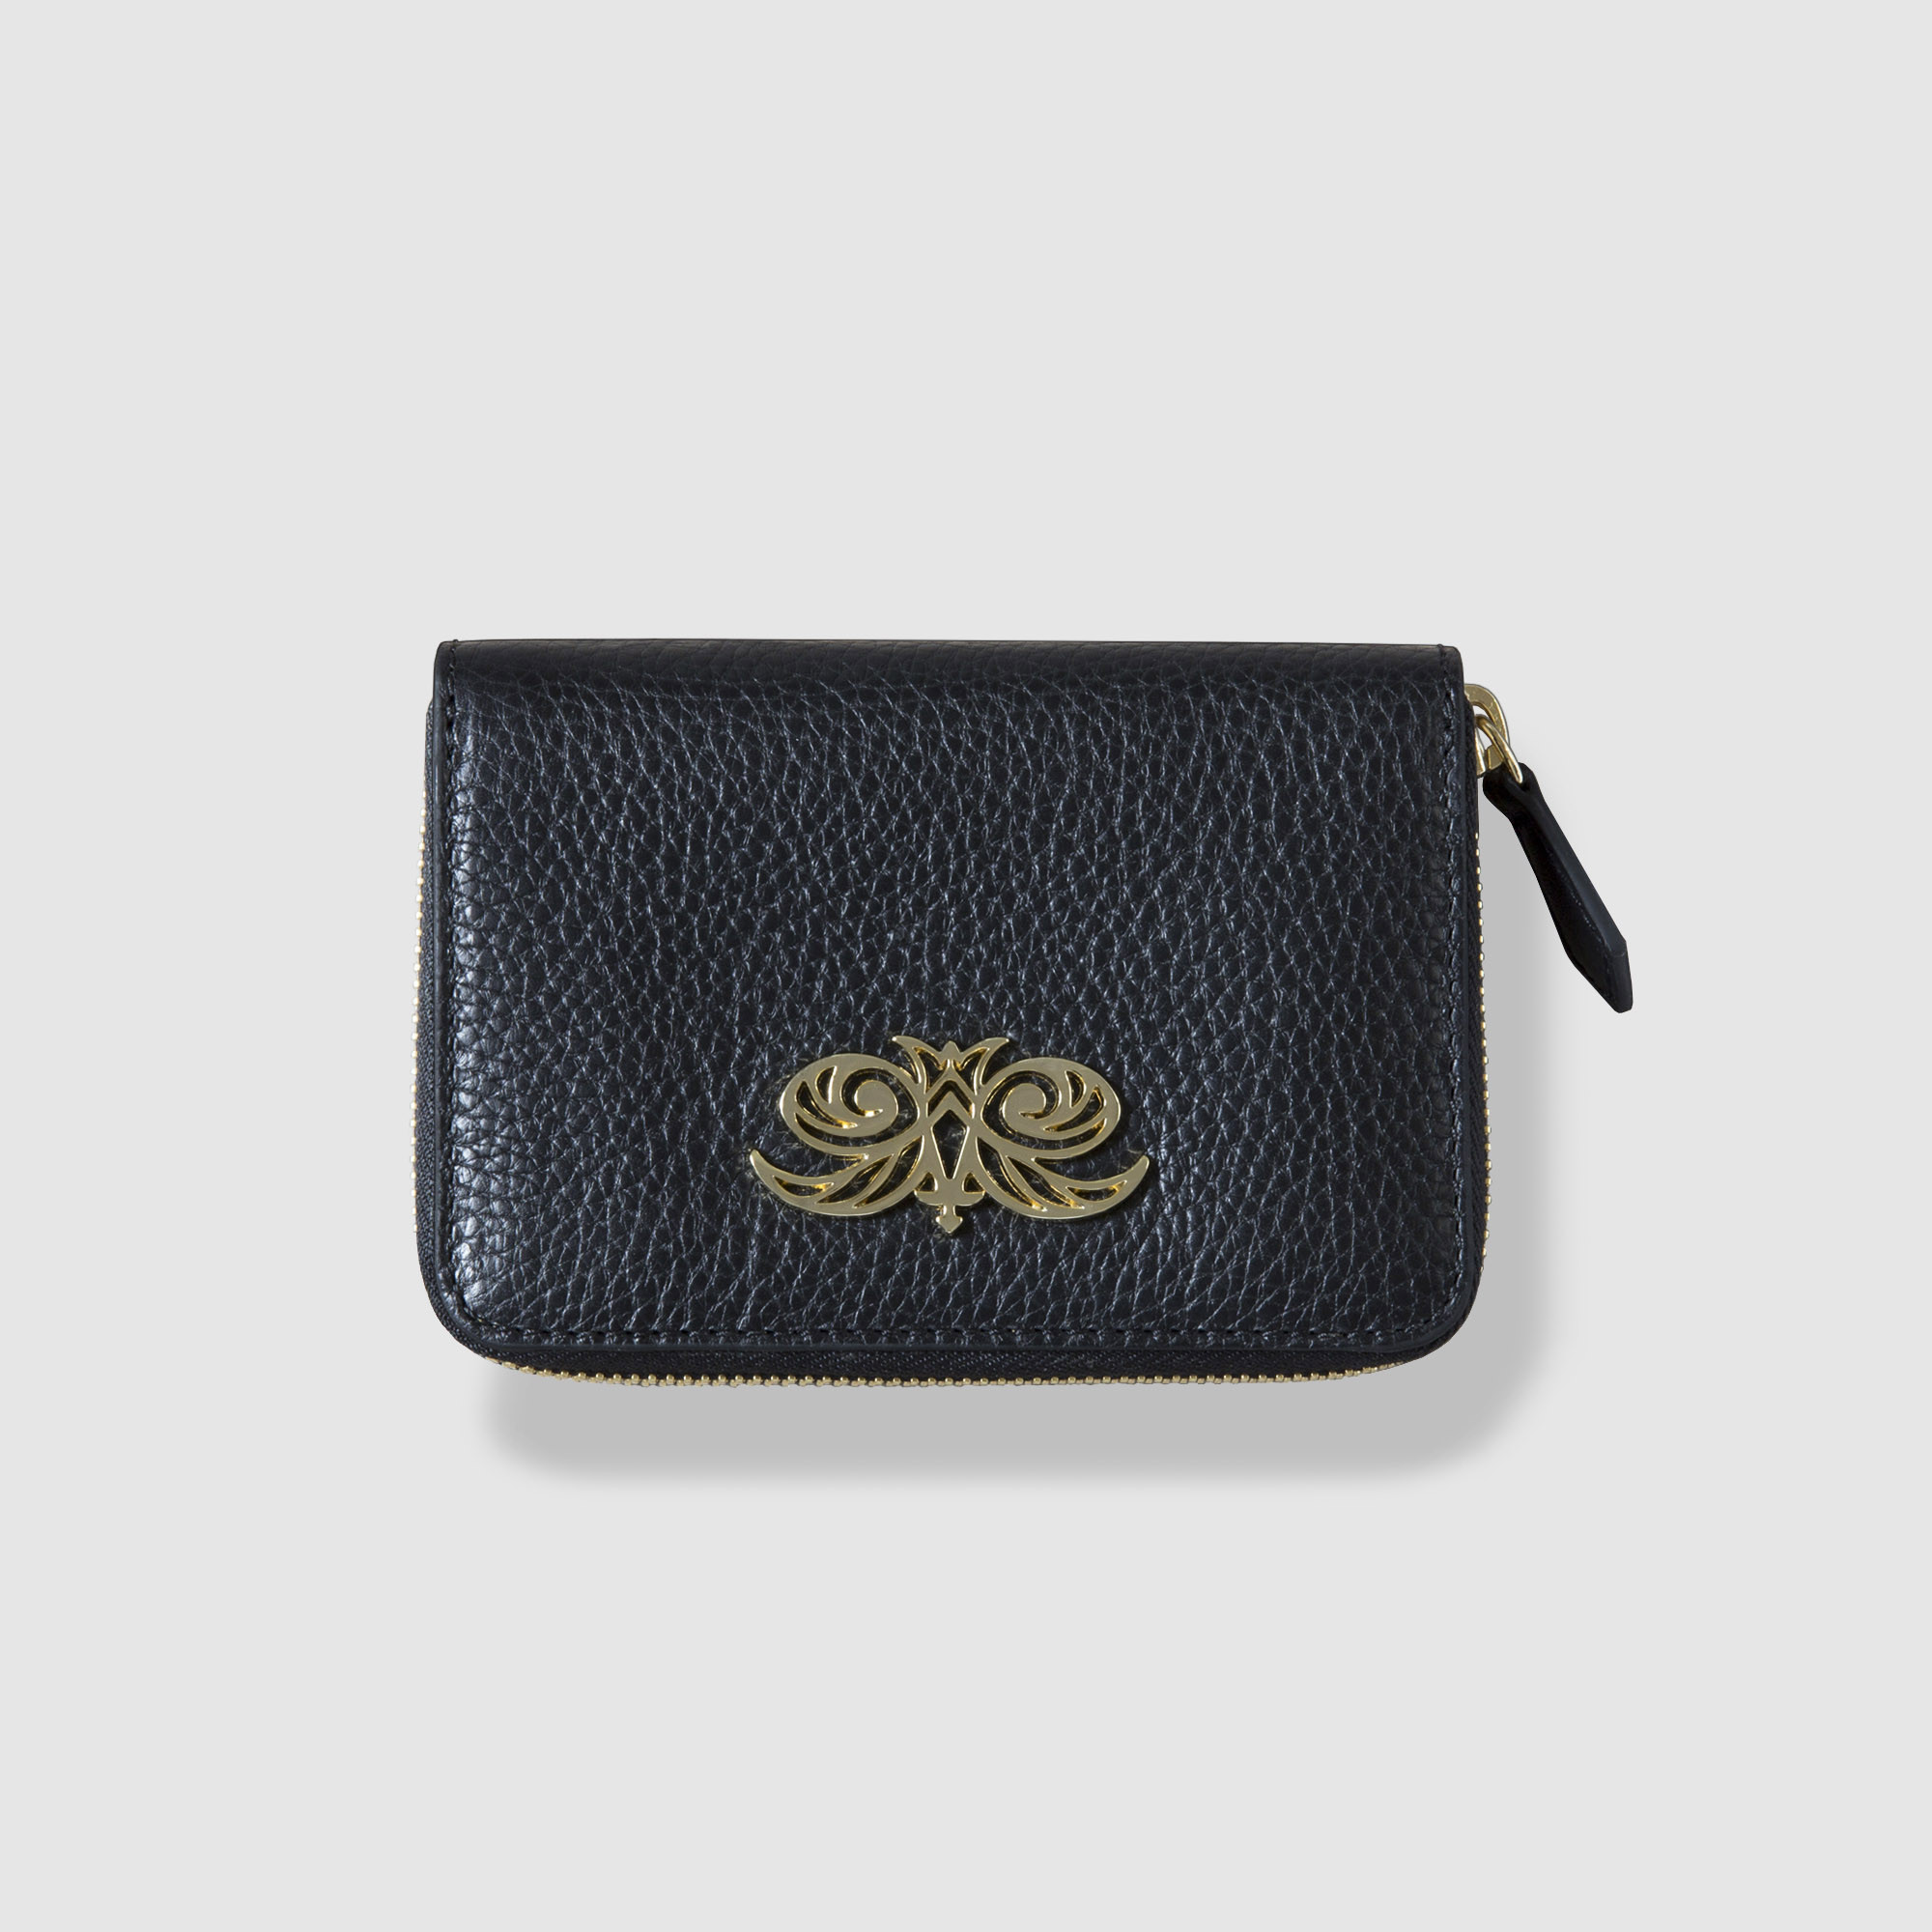 Compact zipped wallet MADRID in black grained calfskin - front view